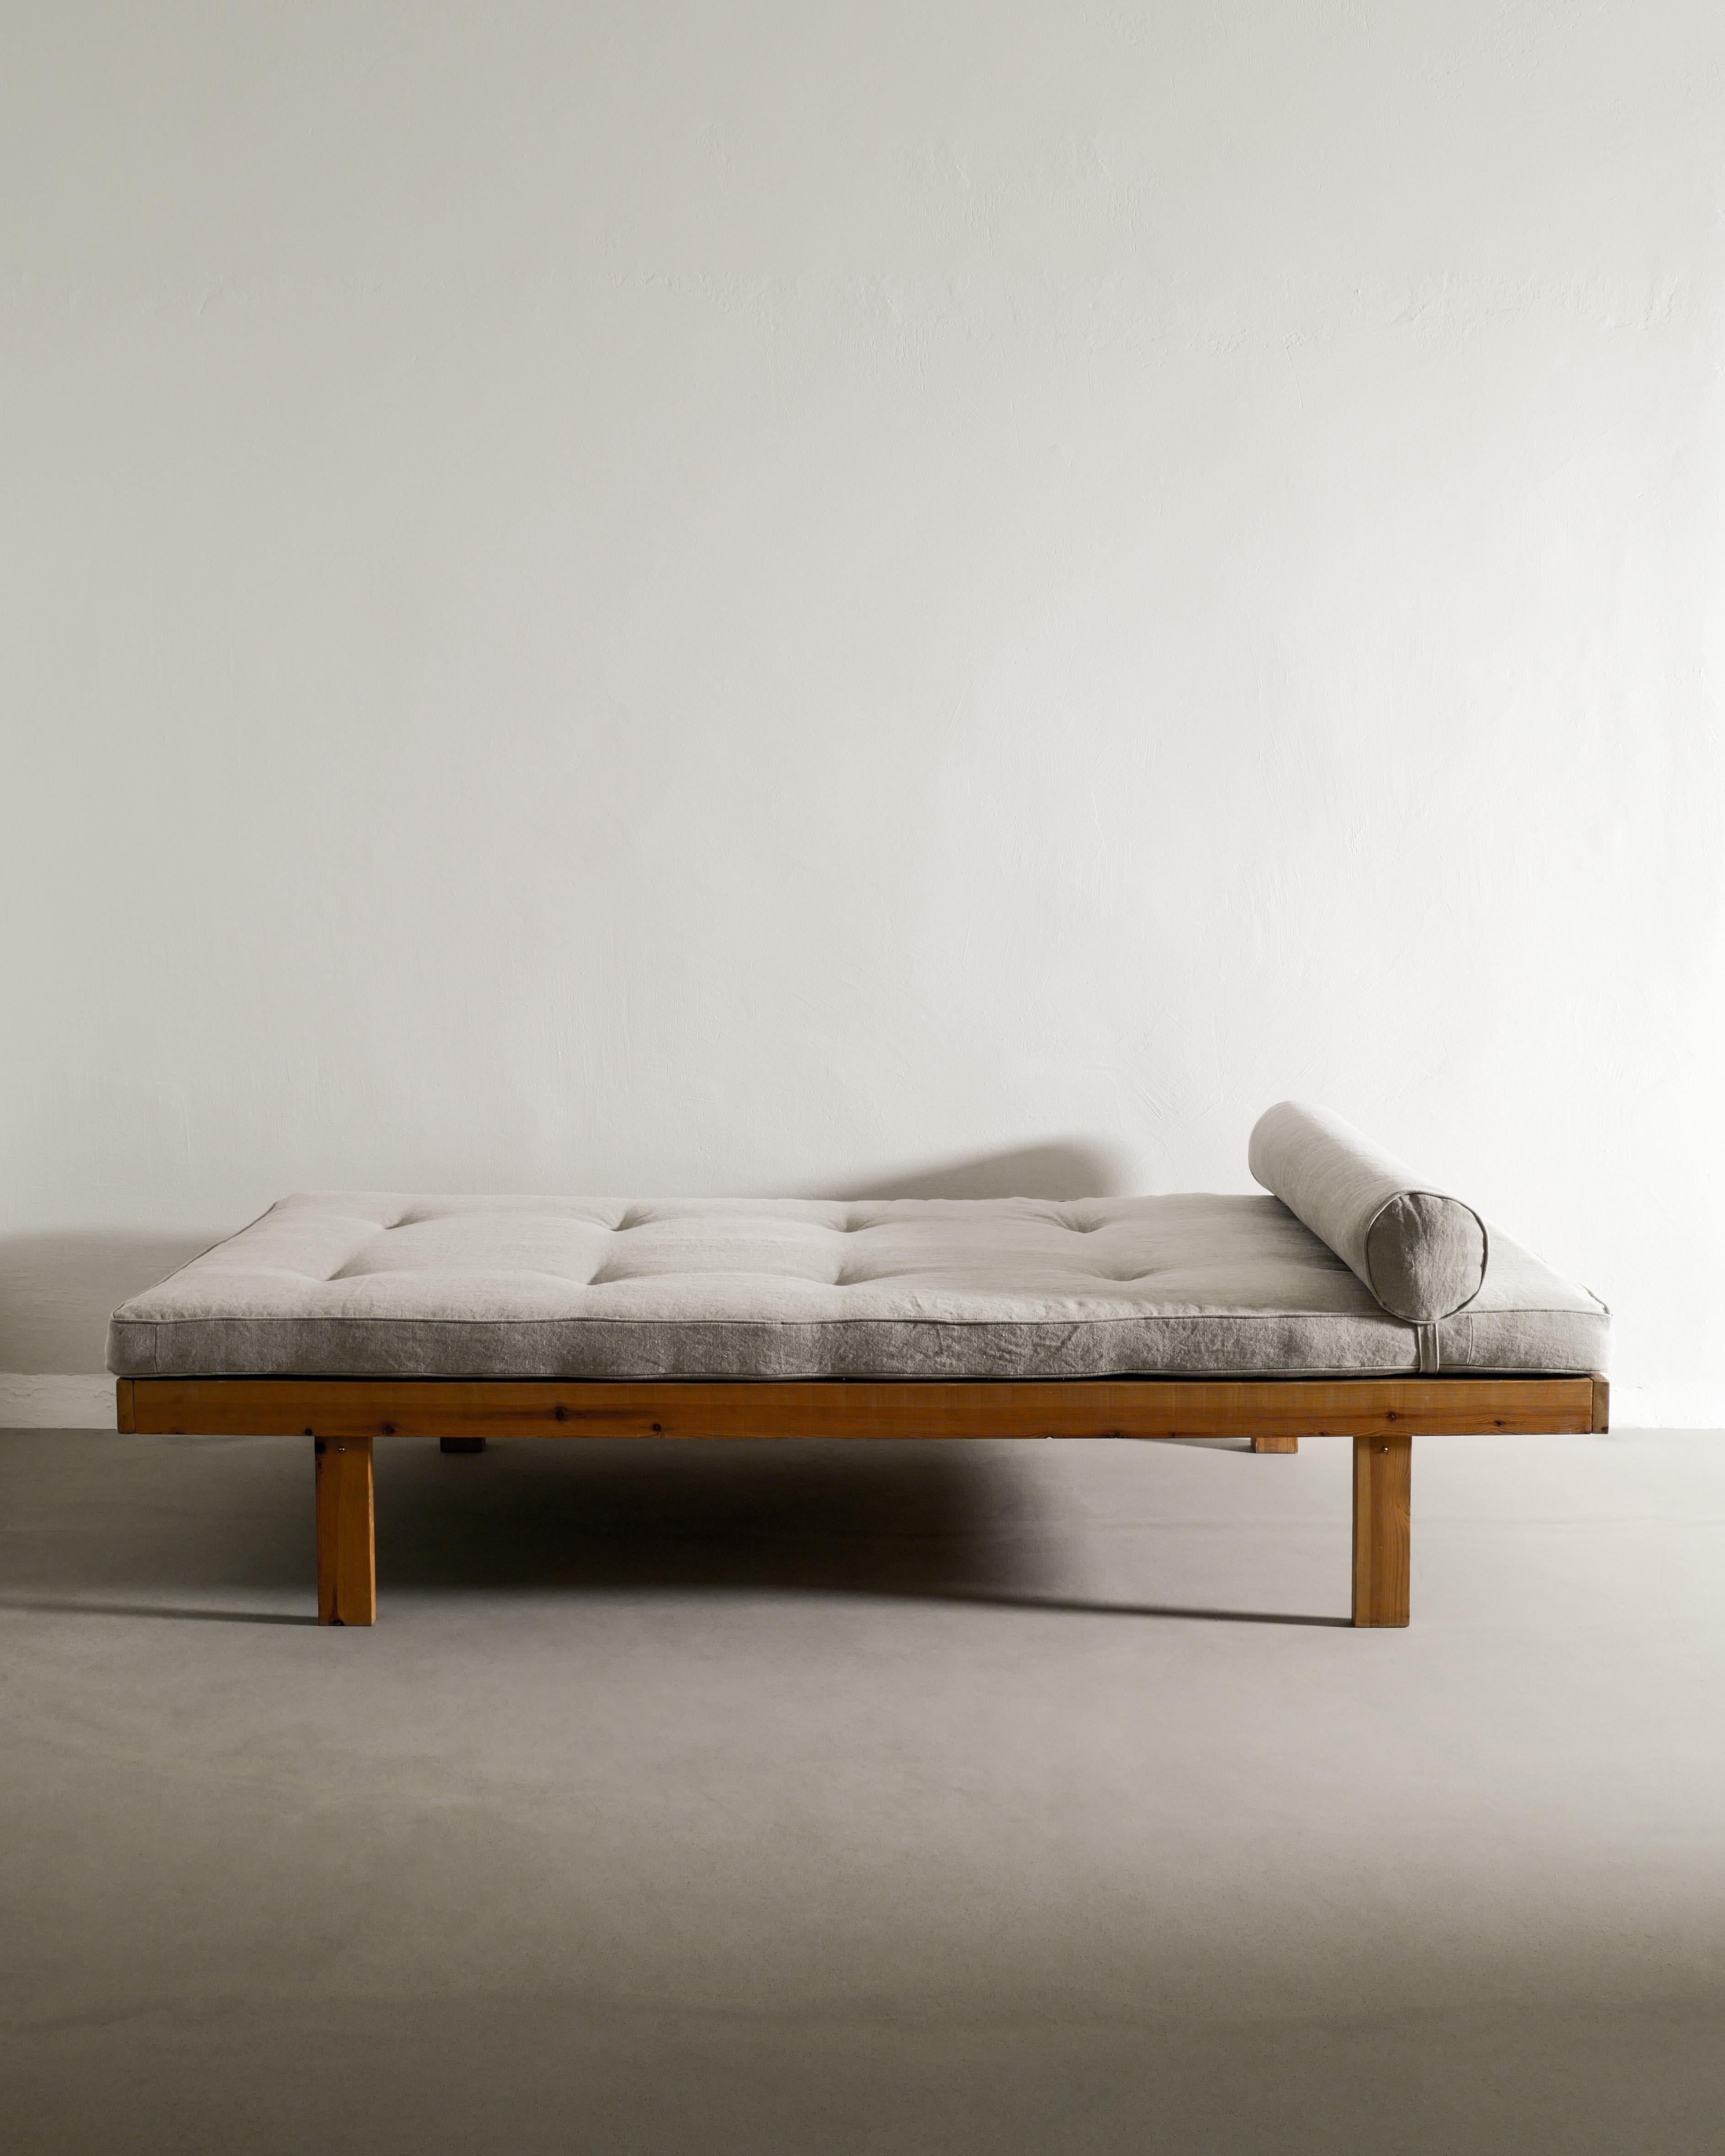 Rare mid century wooden daybed in pine in style of Charlotte Perriand / Pierre Chapo produced by anonymous designer in Denmark, 1960s. In good original condition with a newly made mattress by us. 

Dimensions: H: 57 cm / 22.45